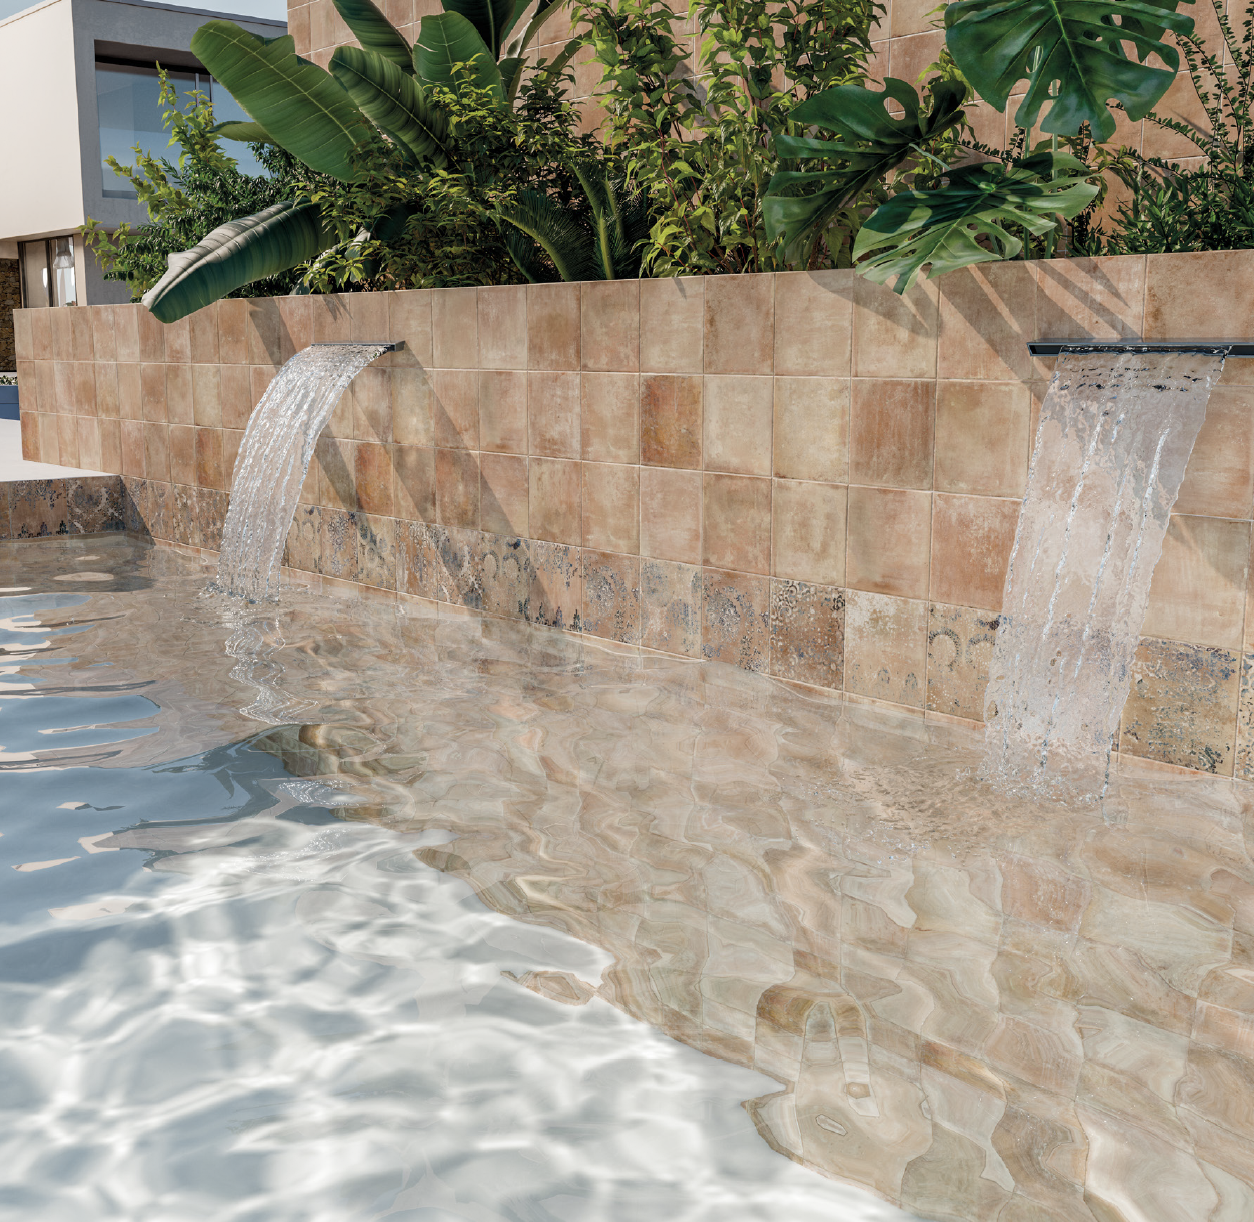 Southwestern influenced tile in pool application